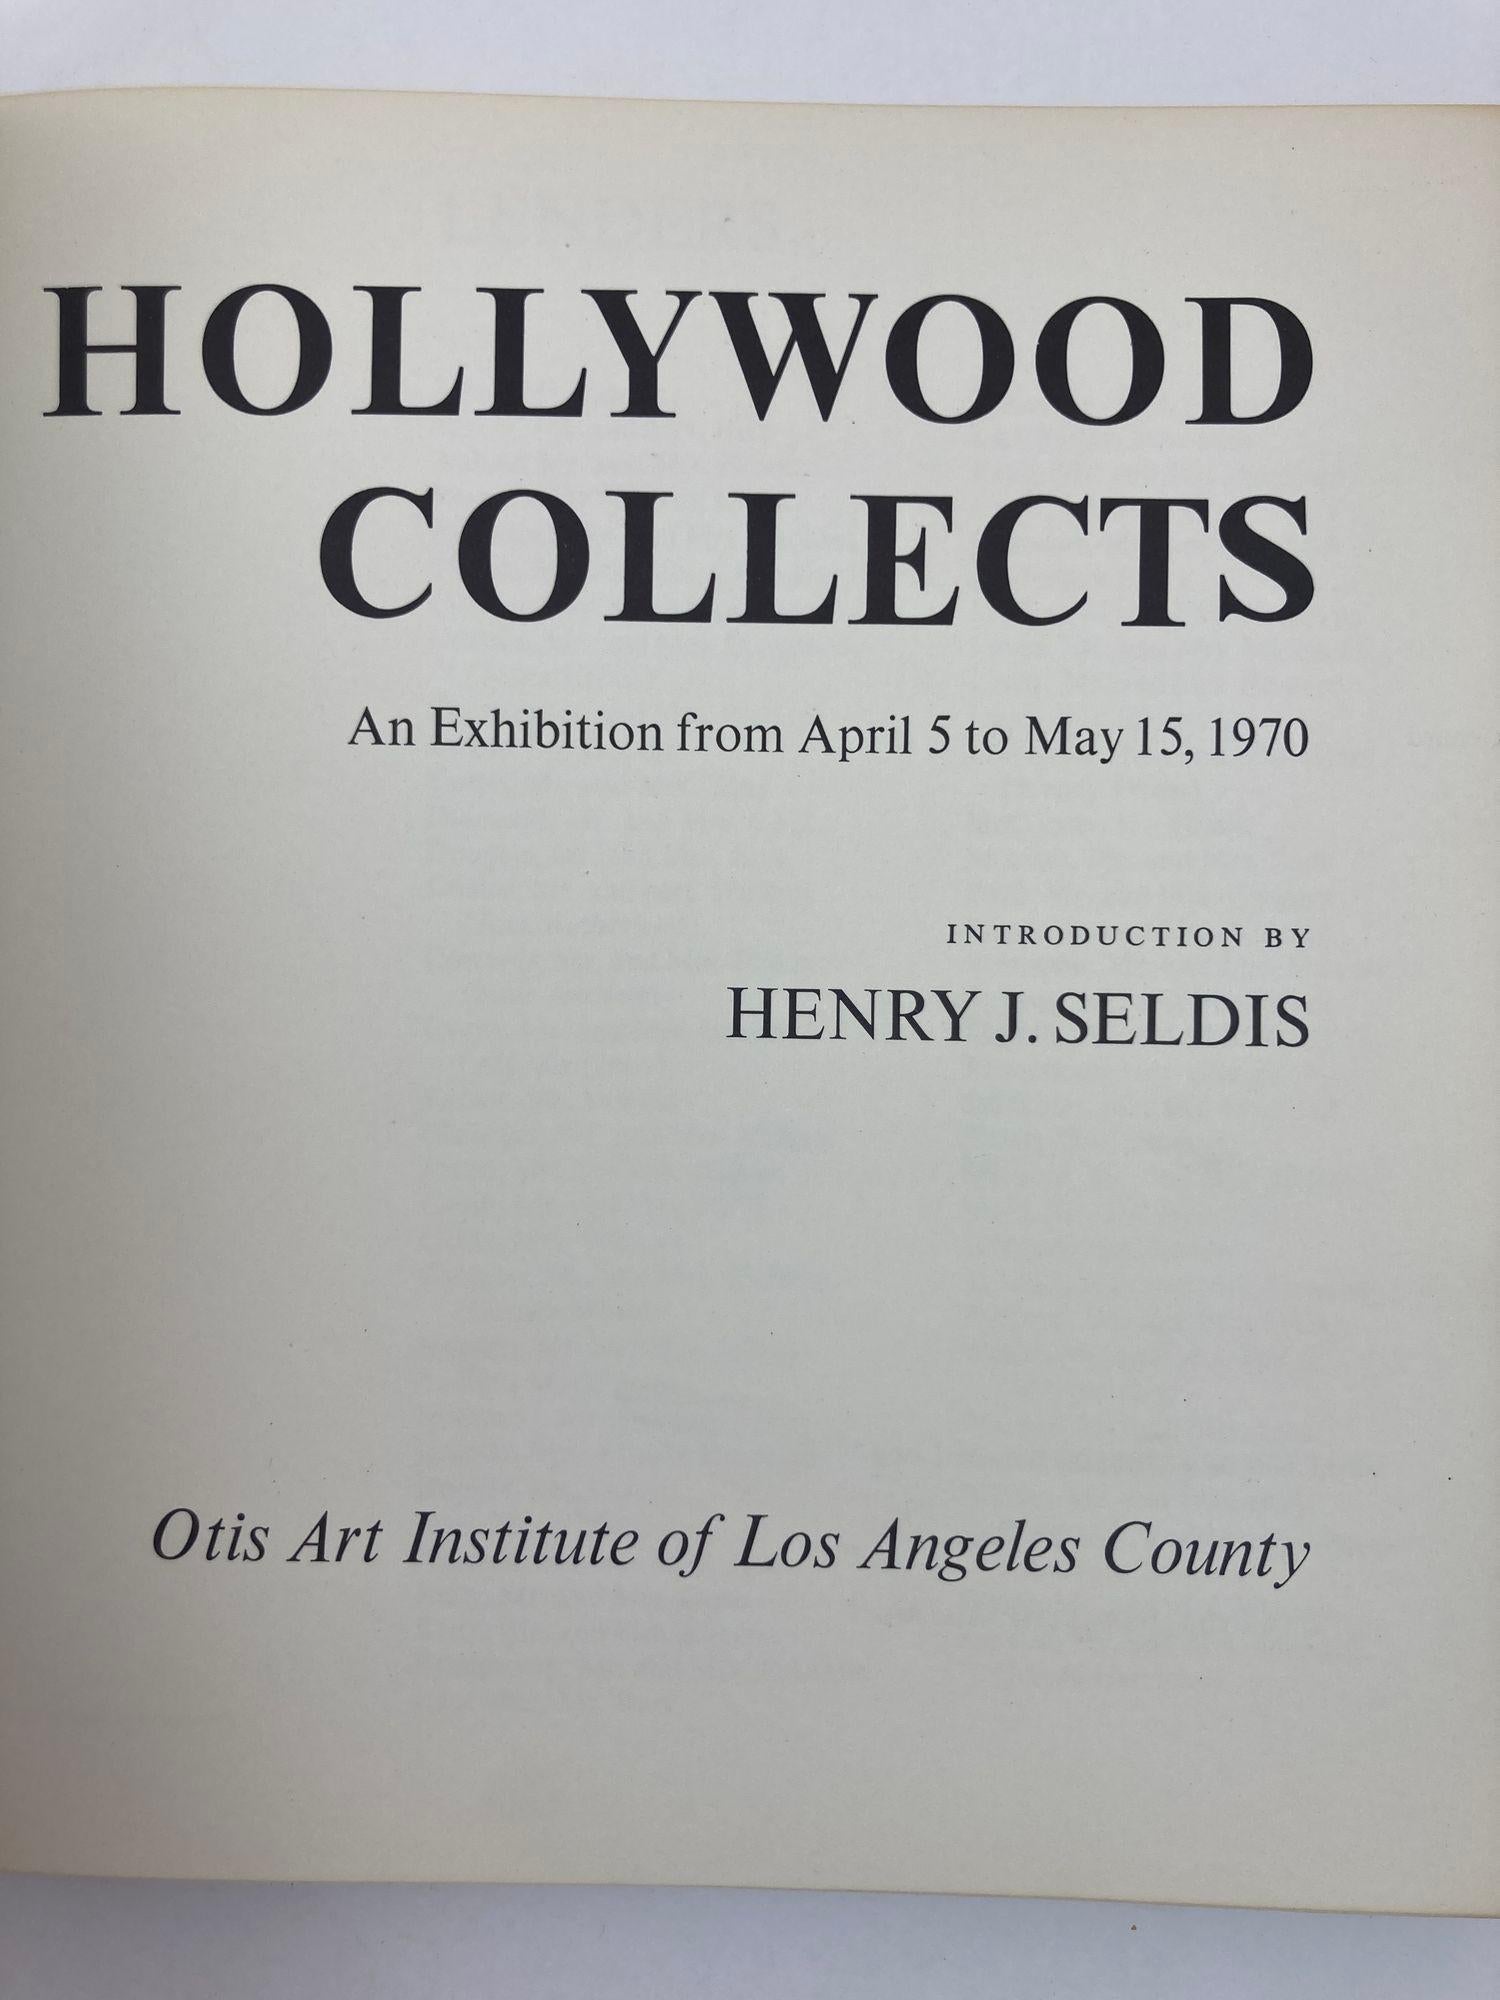 Hollywood Collects An Exhibition from April 5 to May 15 1970 by Seldis Henry J. (editor).
Hardcover Book.
Los Angeles County Museum of Art, Los Angeles, 1973. Quarto, hardcover, near fine in VG white pictorial dj. 